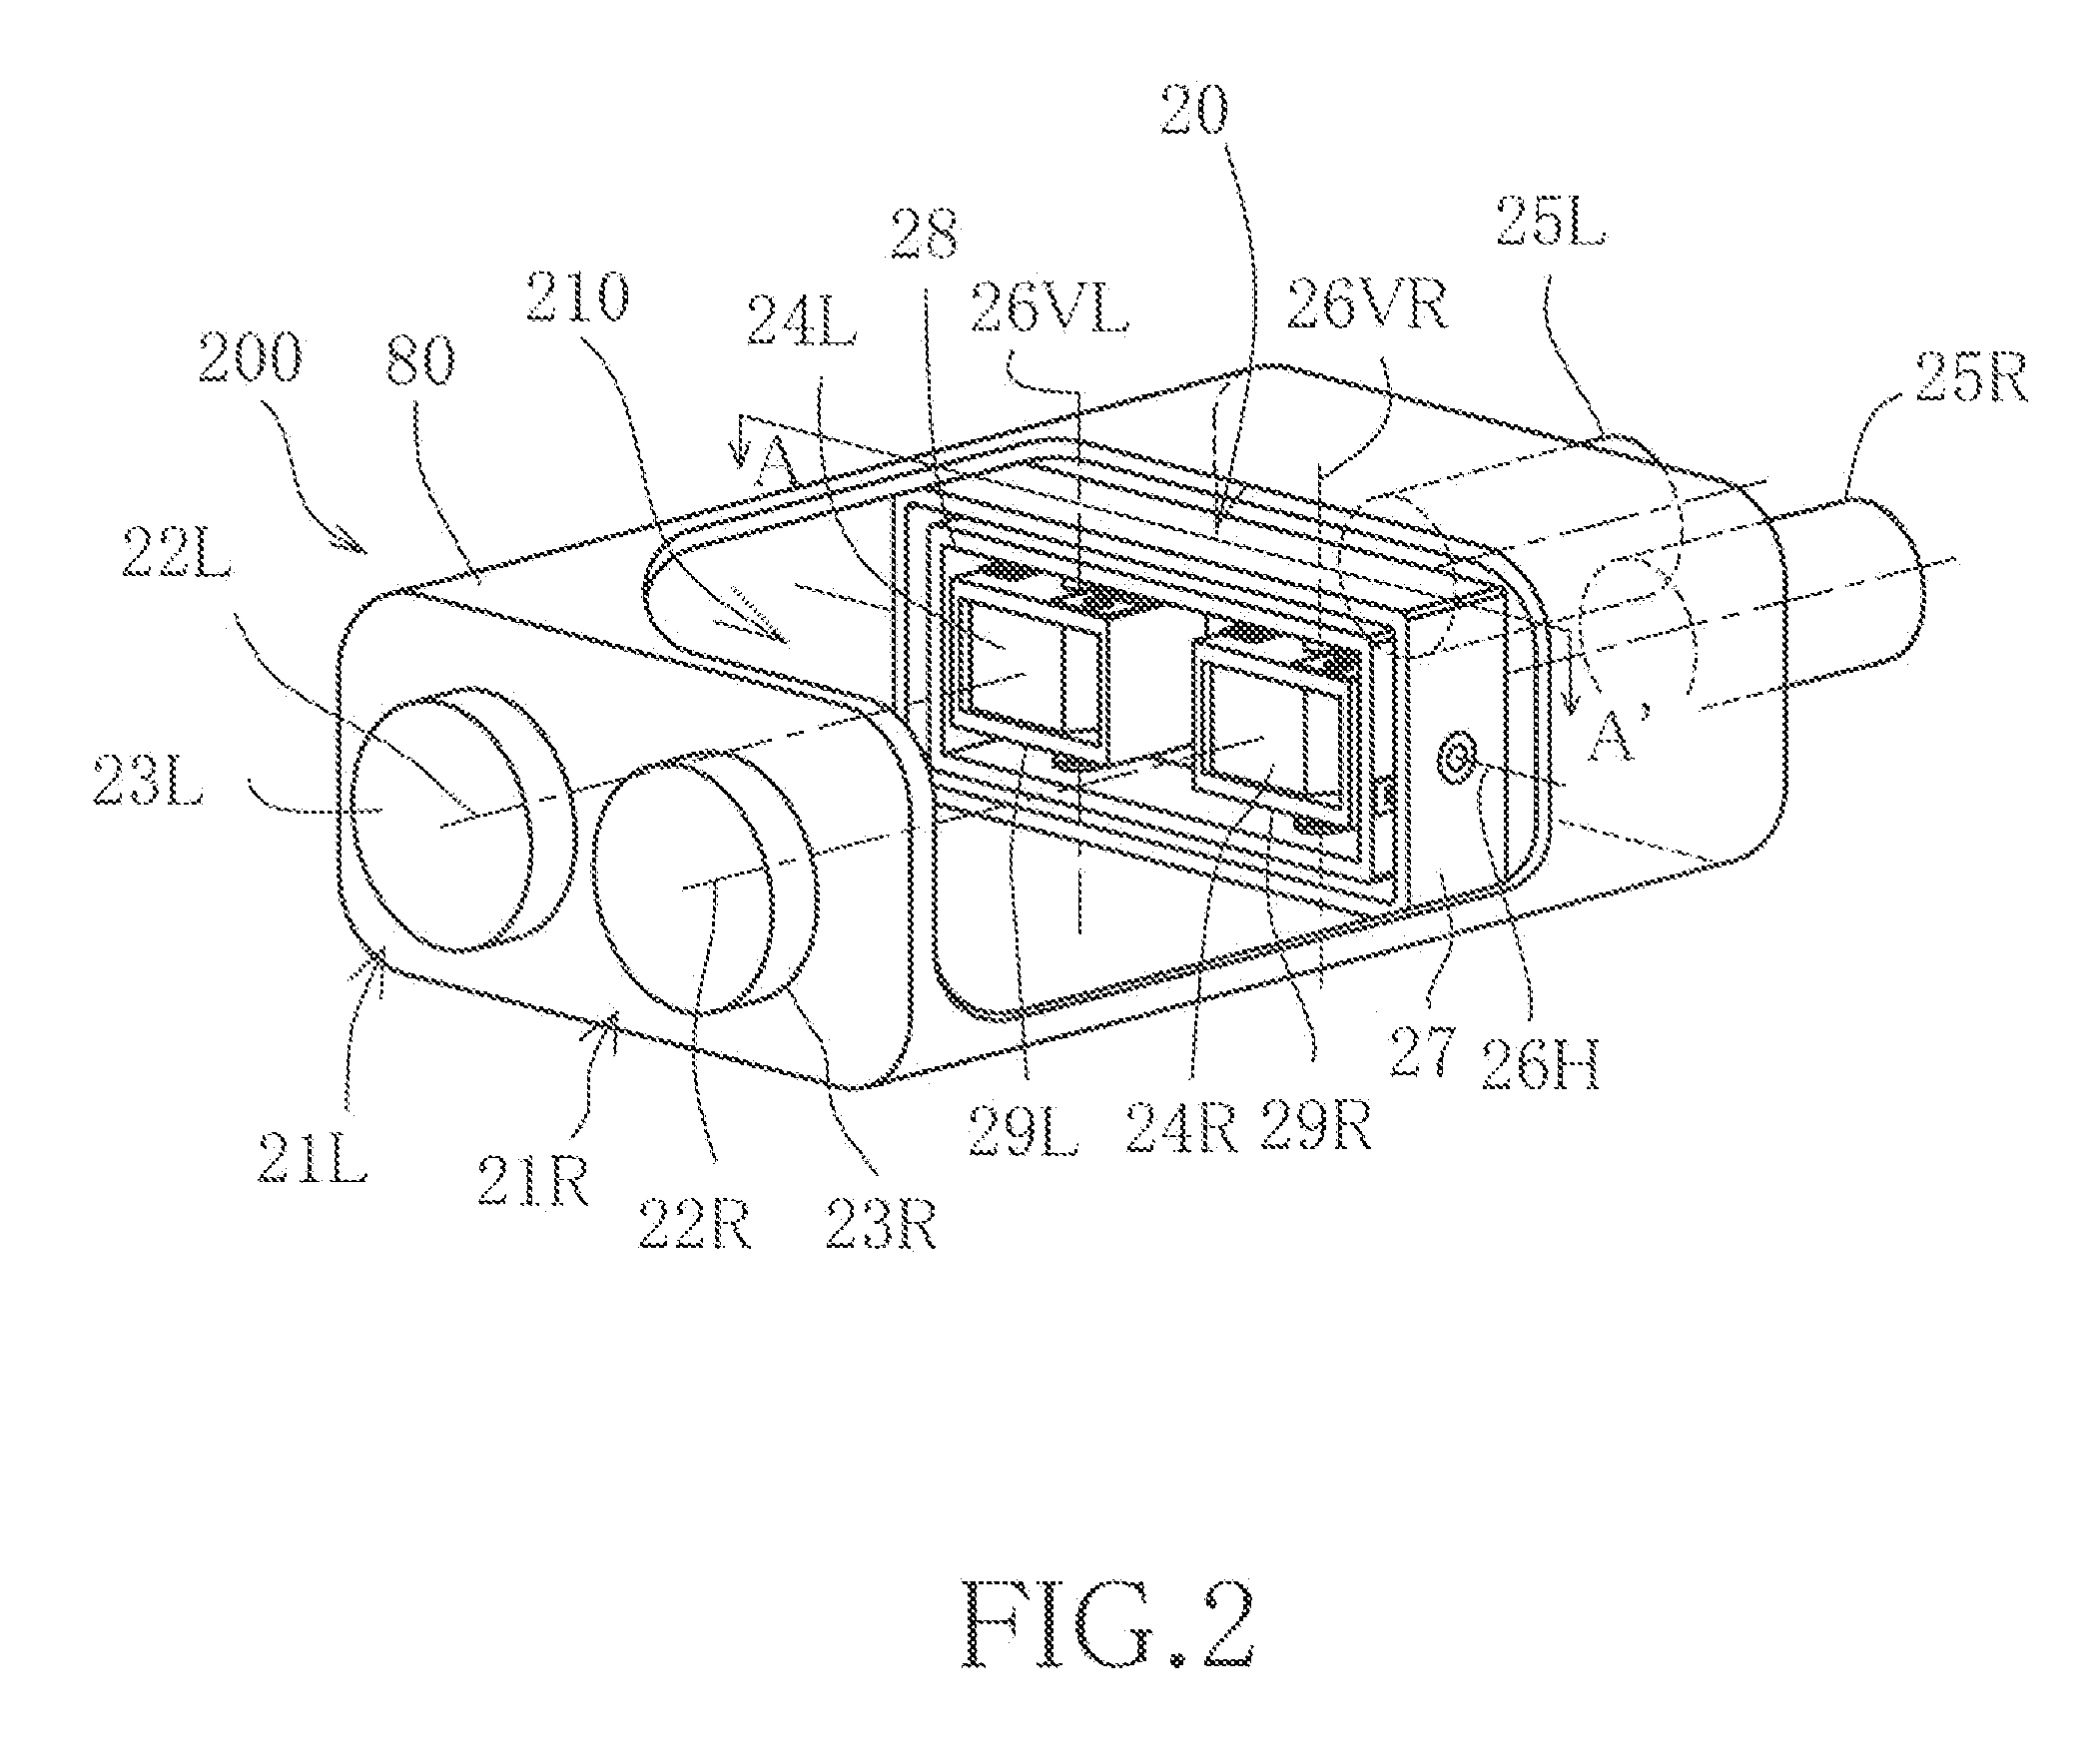 Image stabilizing device and system for telescopic optical instruments